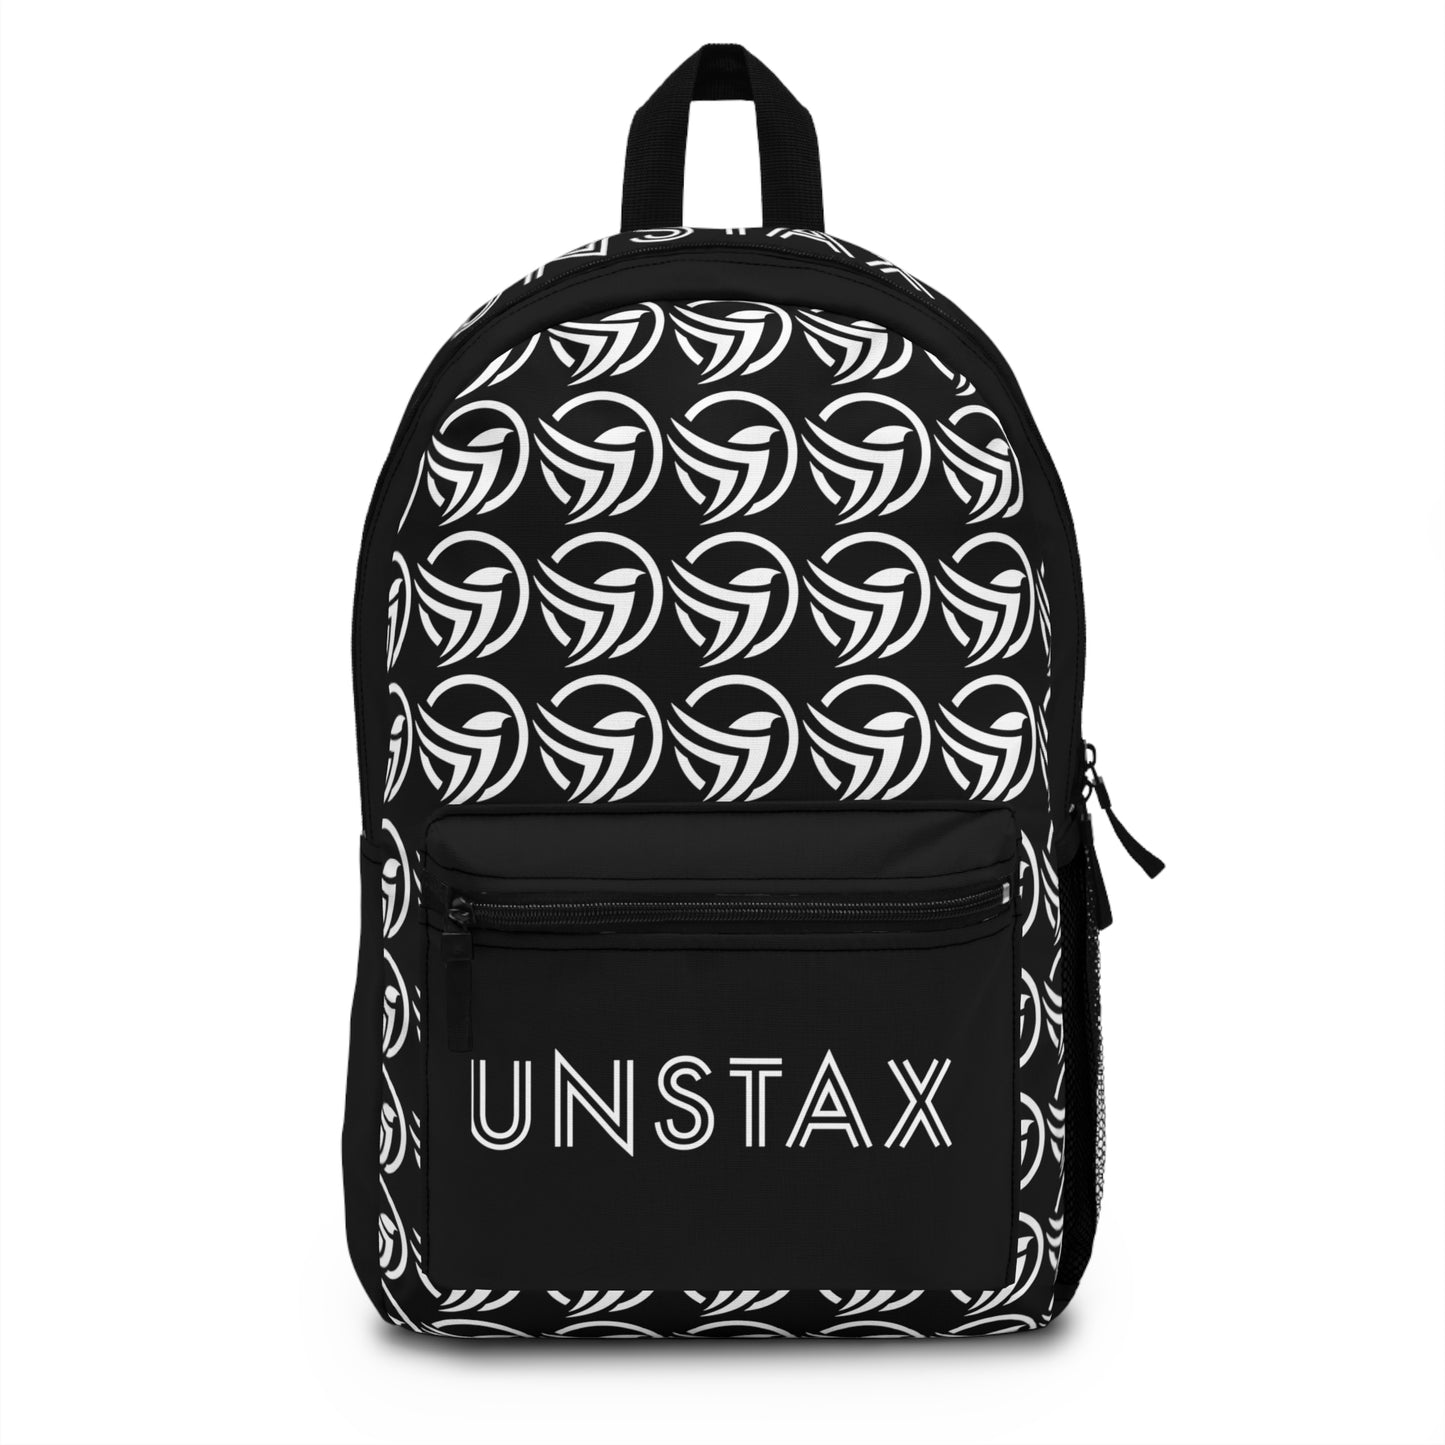 Unstax All Over Backpack